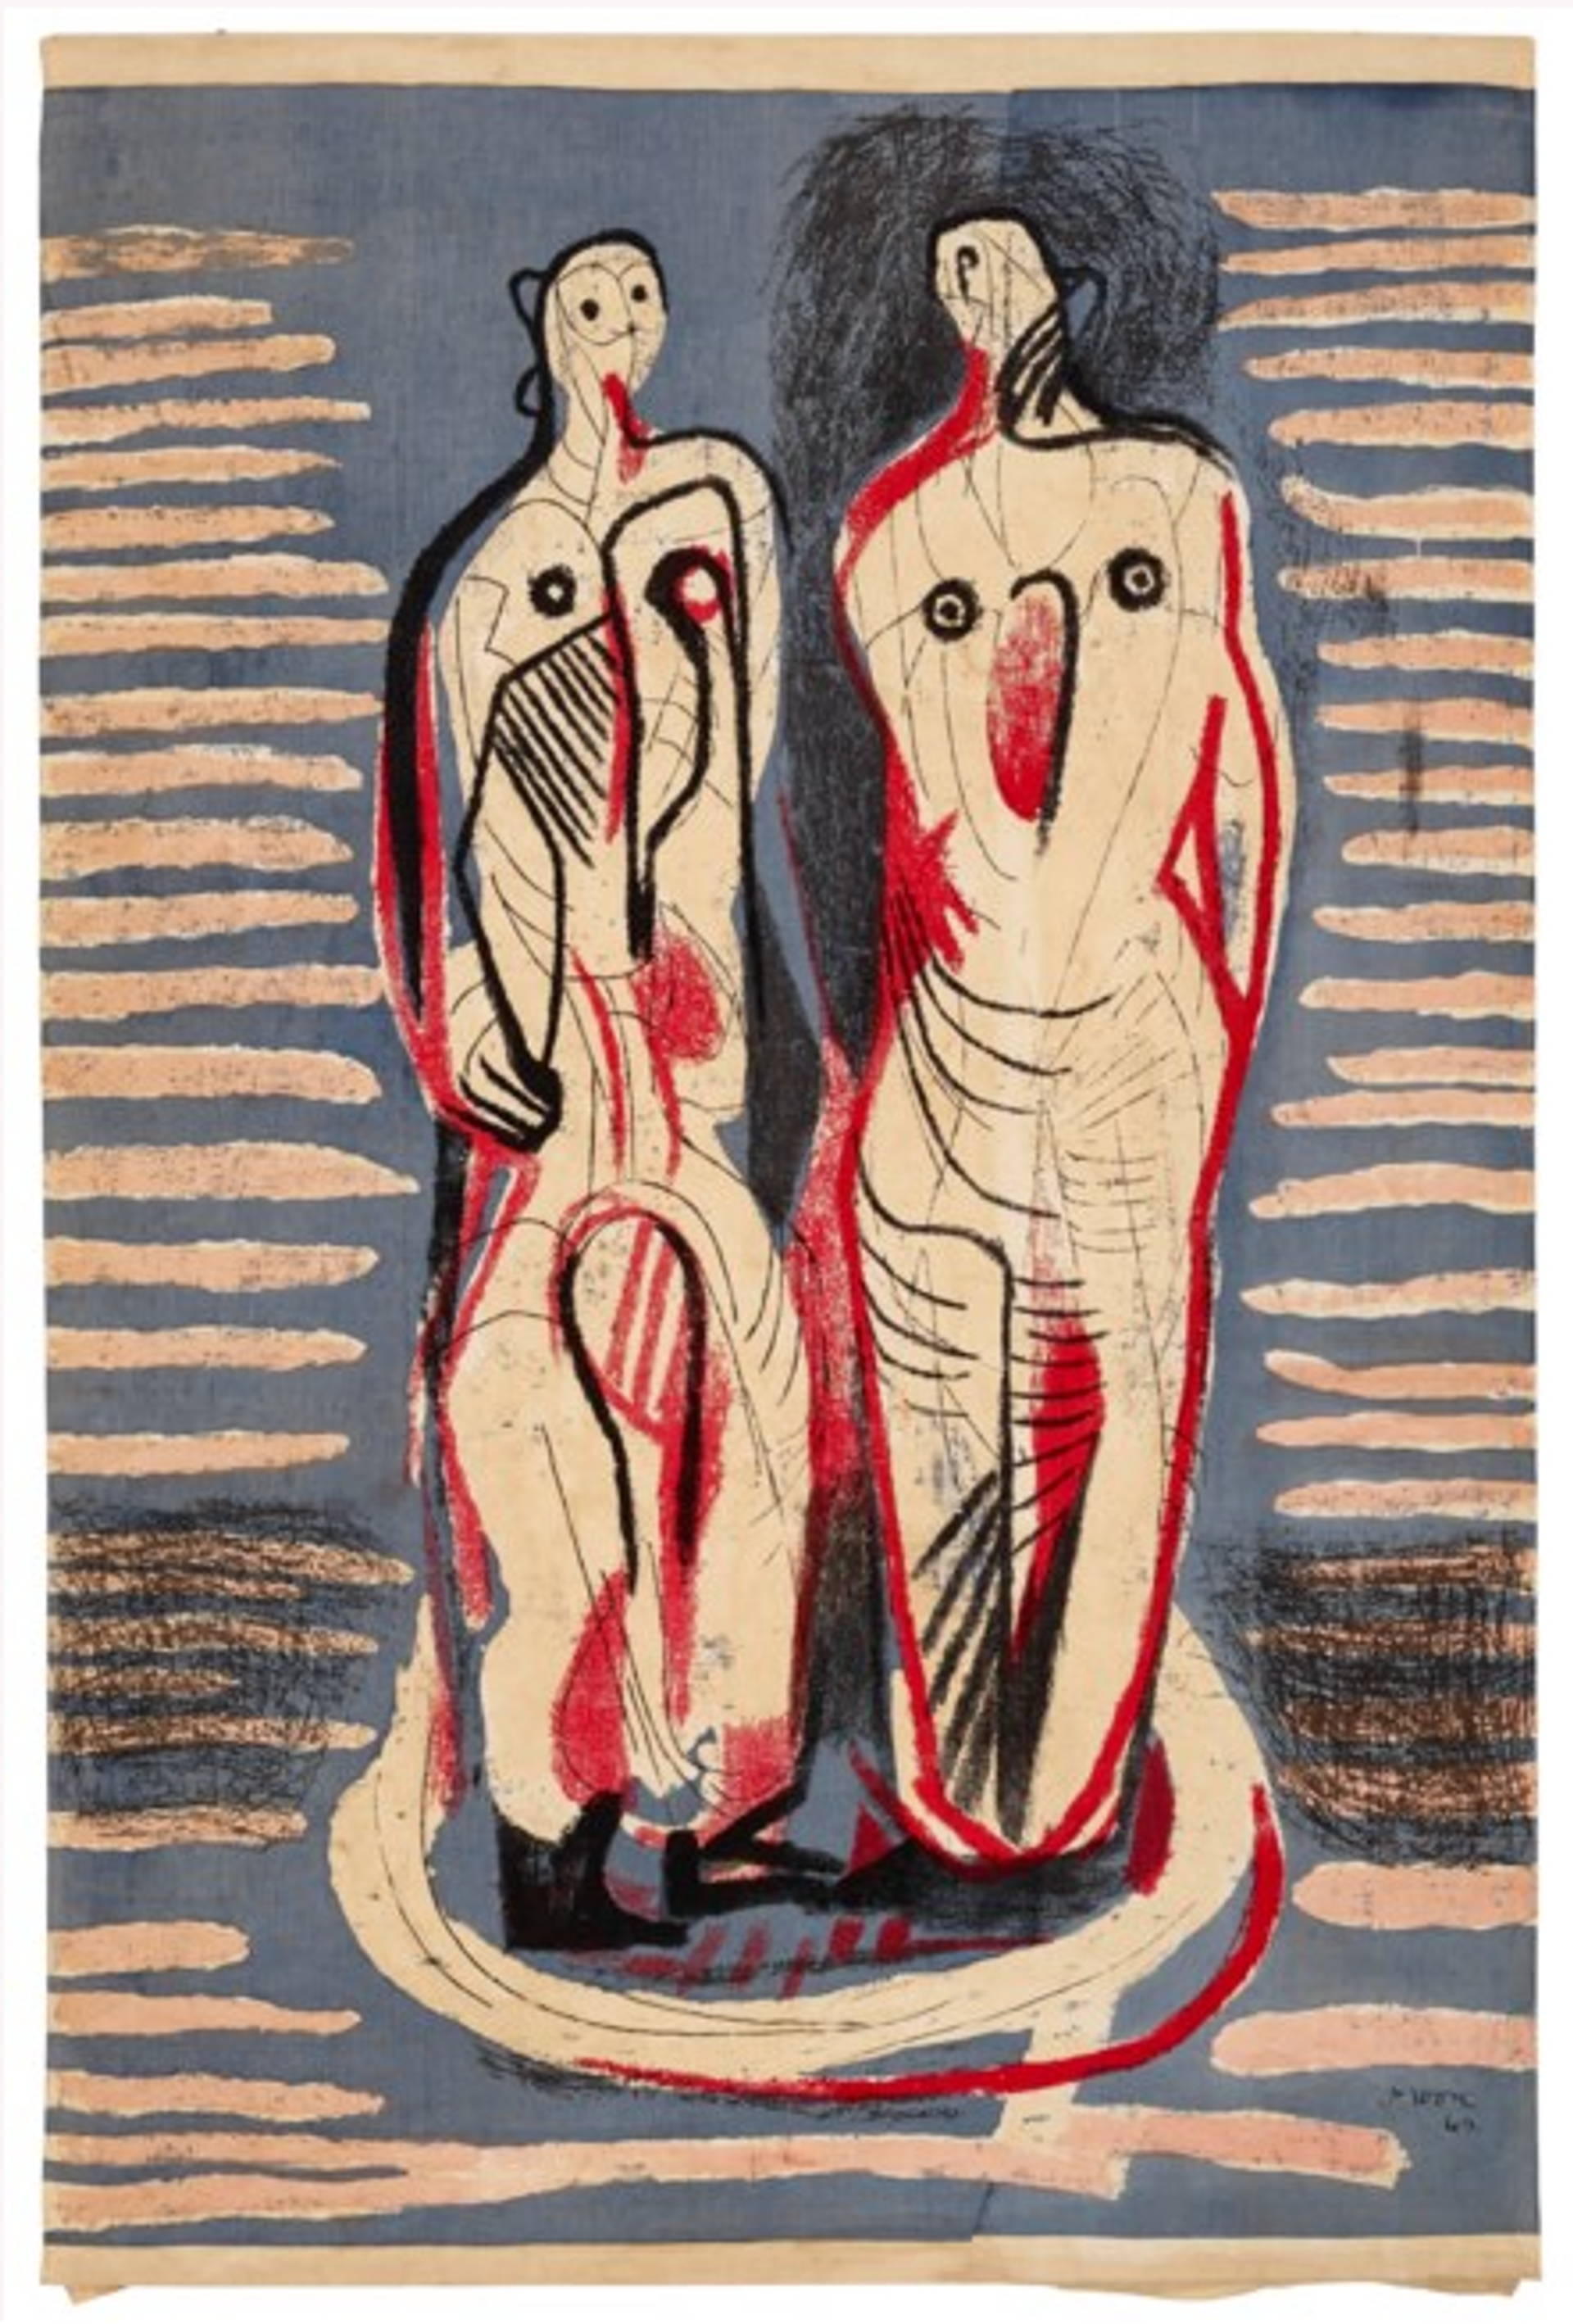 A colored screenprint of two abstracted standing figures on a circular platform. The figures have loosely defined body features outlined in black and red lines. They are set against a subdued blue background with contrasting horizontal beige lines.